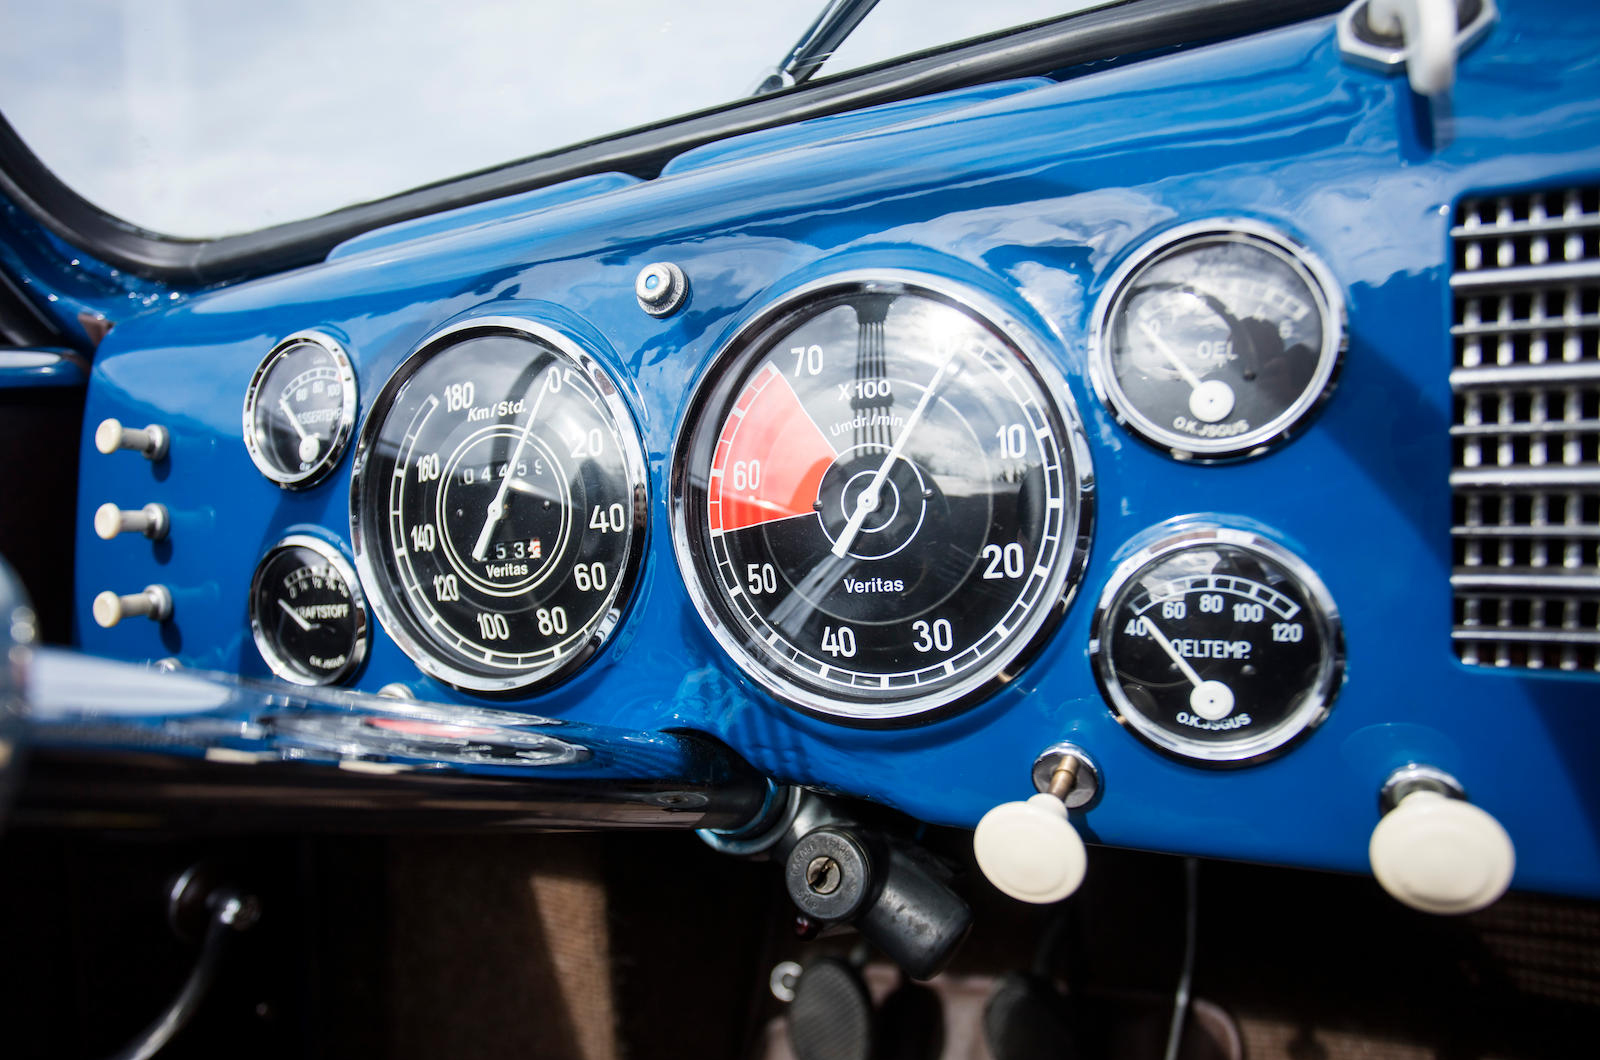 Classic & Sports Car – Is this the most beautiful classic car you’ve never heard of?